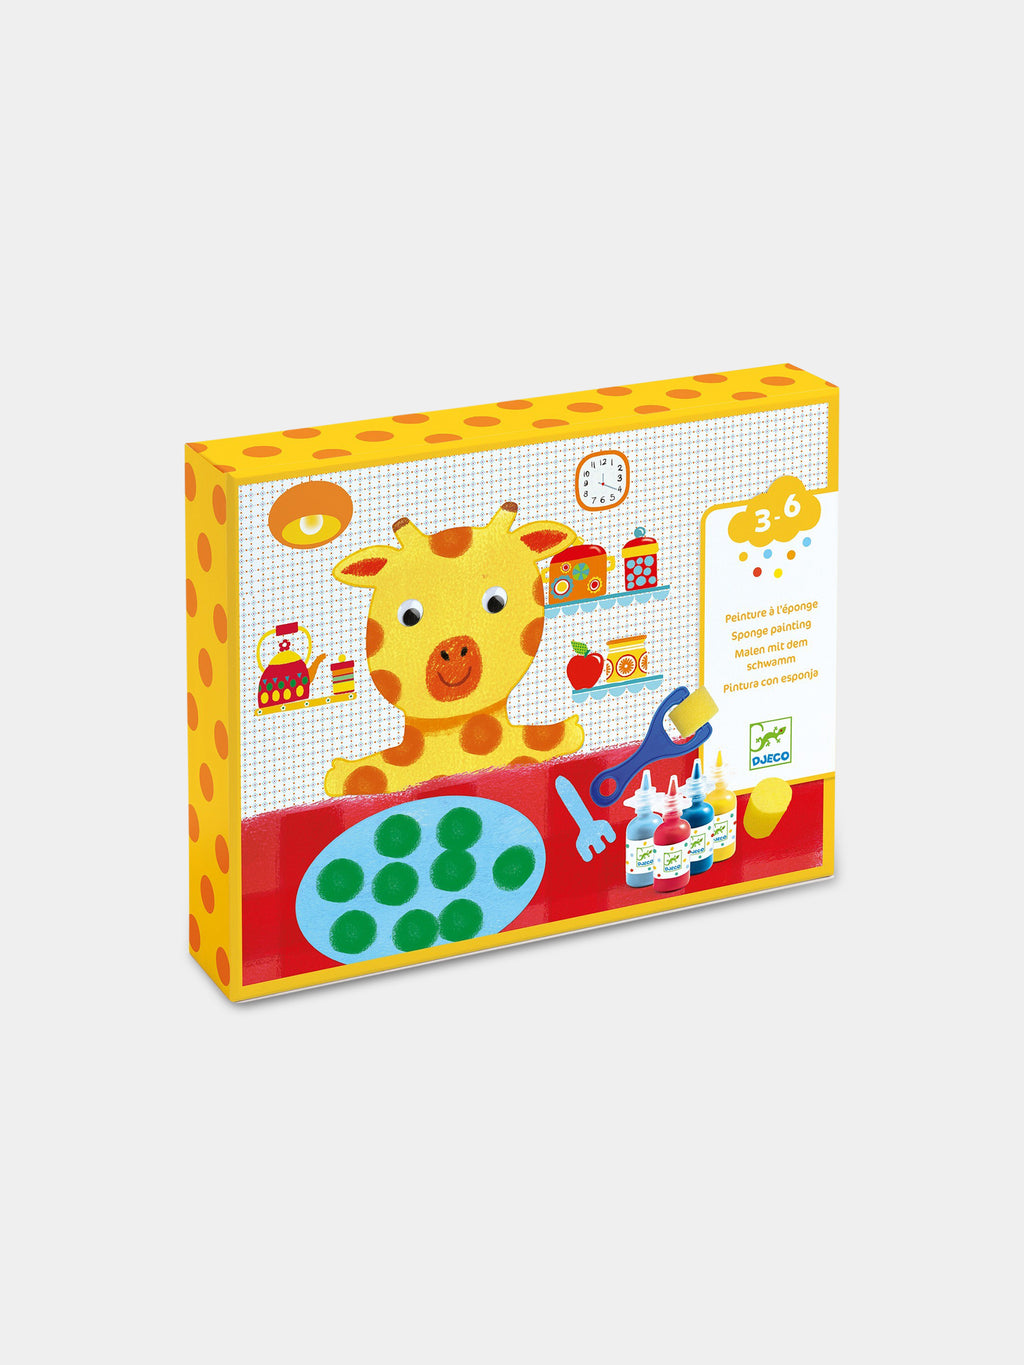 Multicolor paintingkit for kids